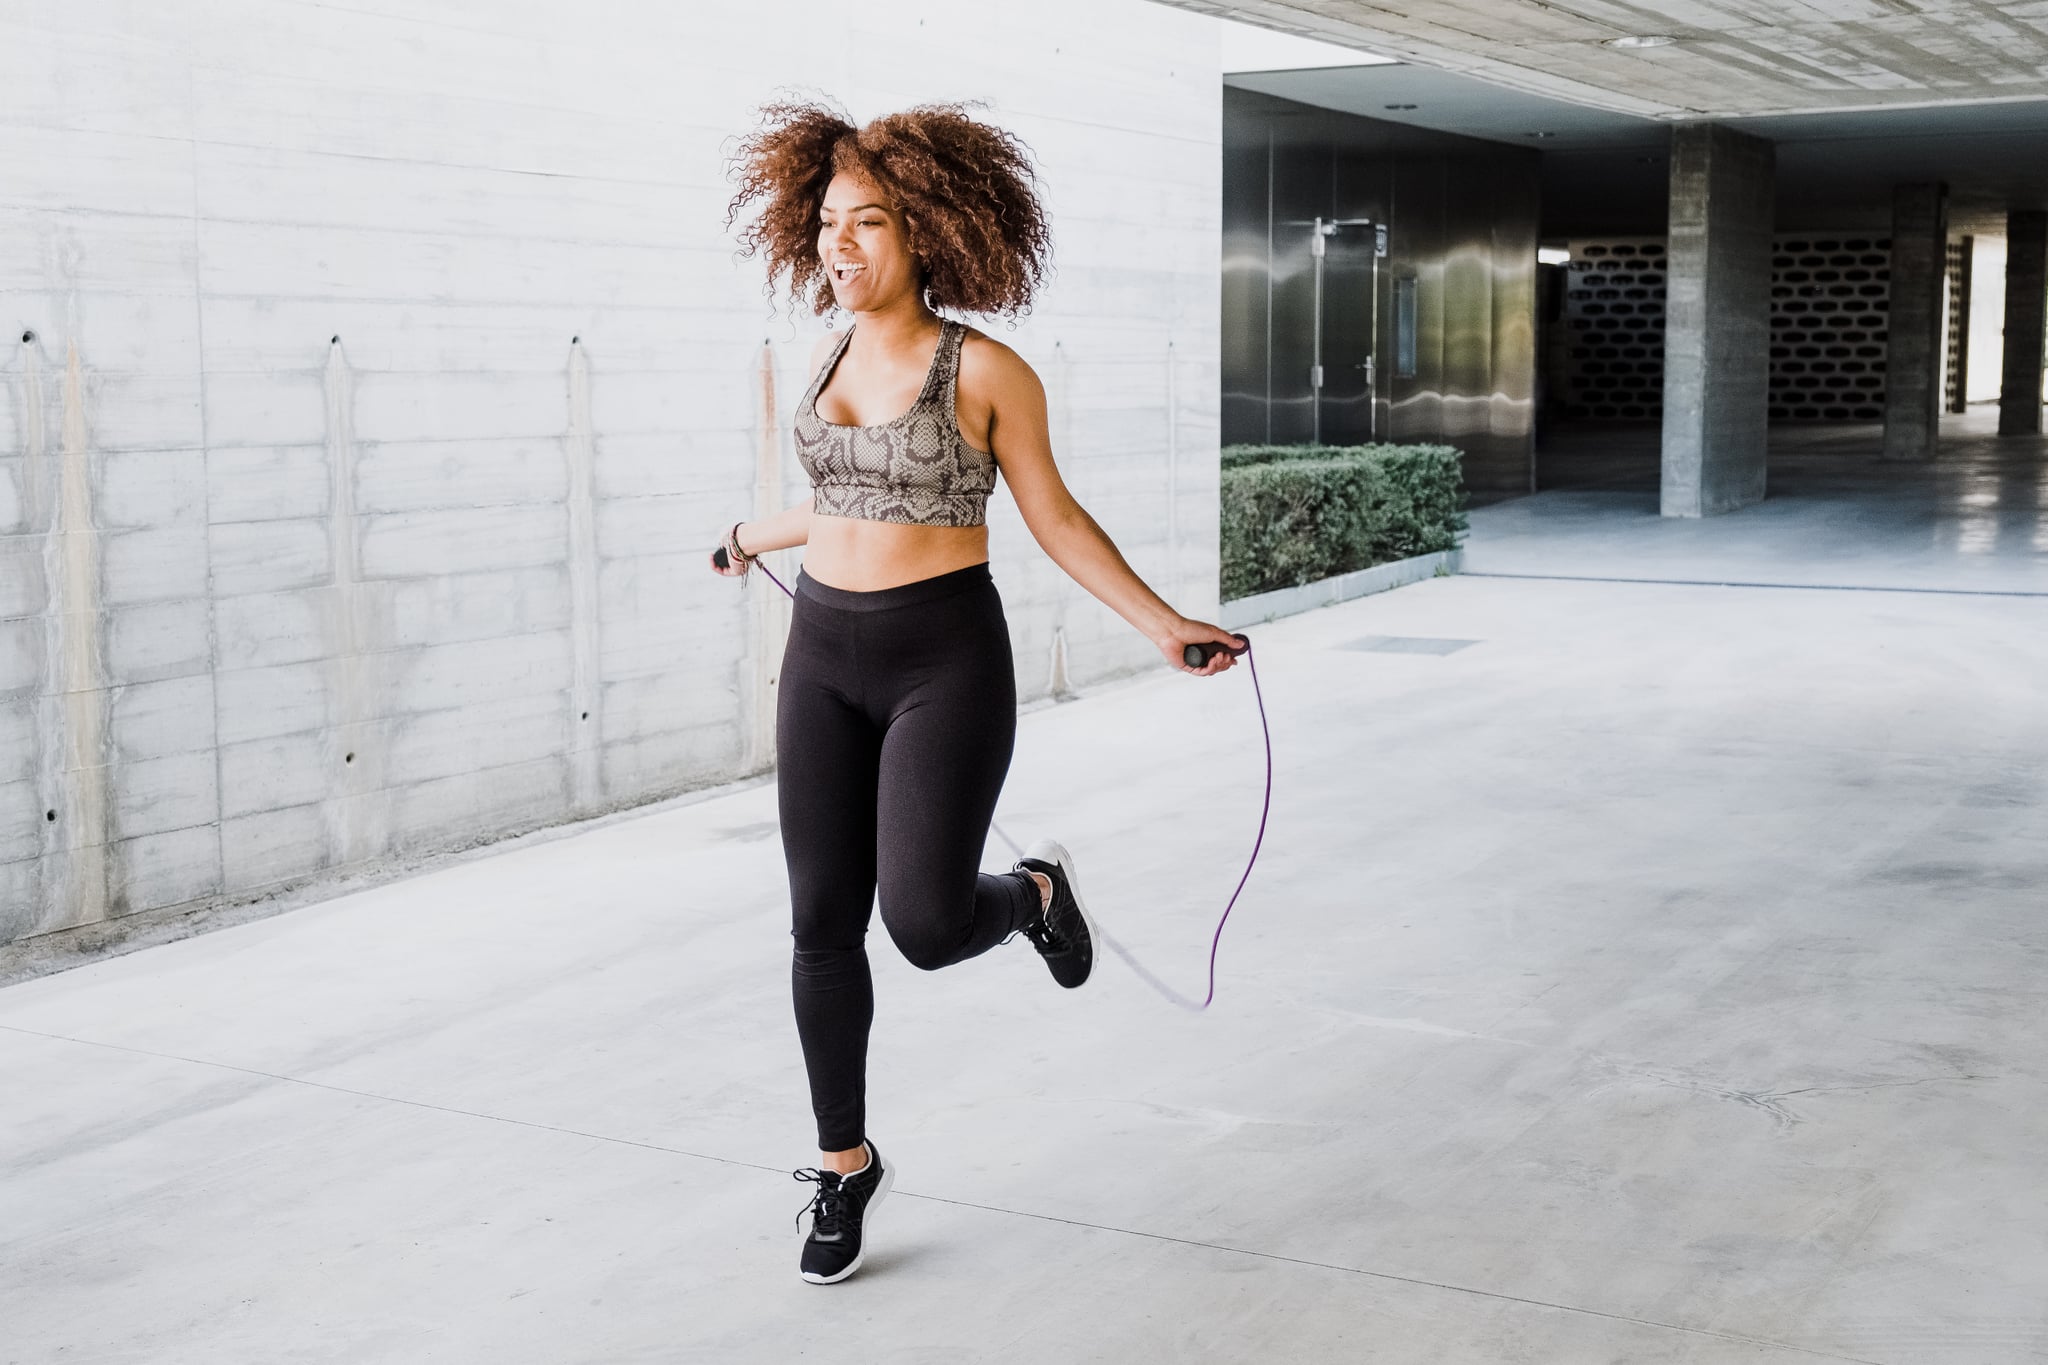 How Long Should Your Jump Rope Be?